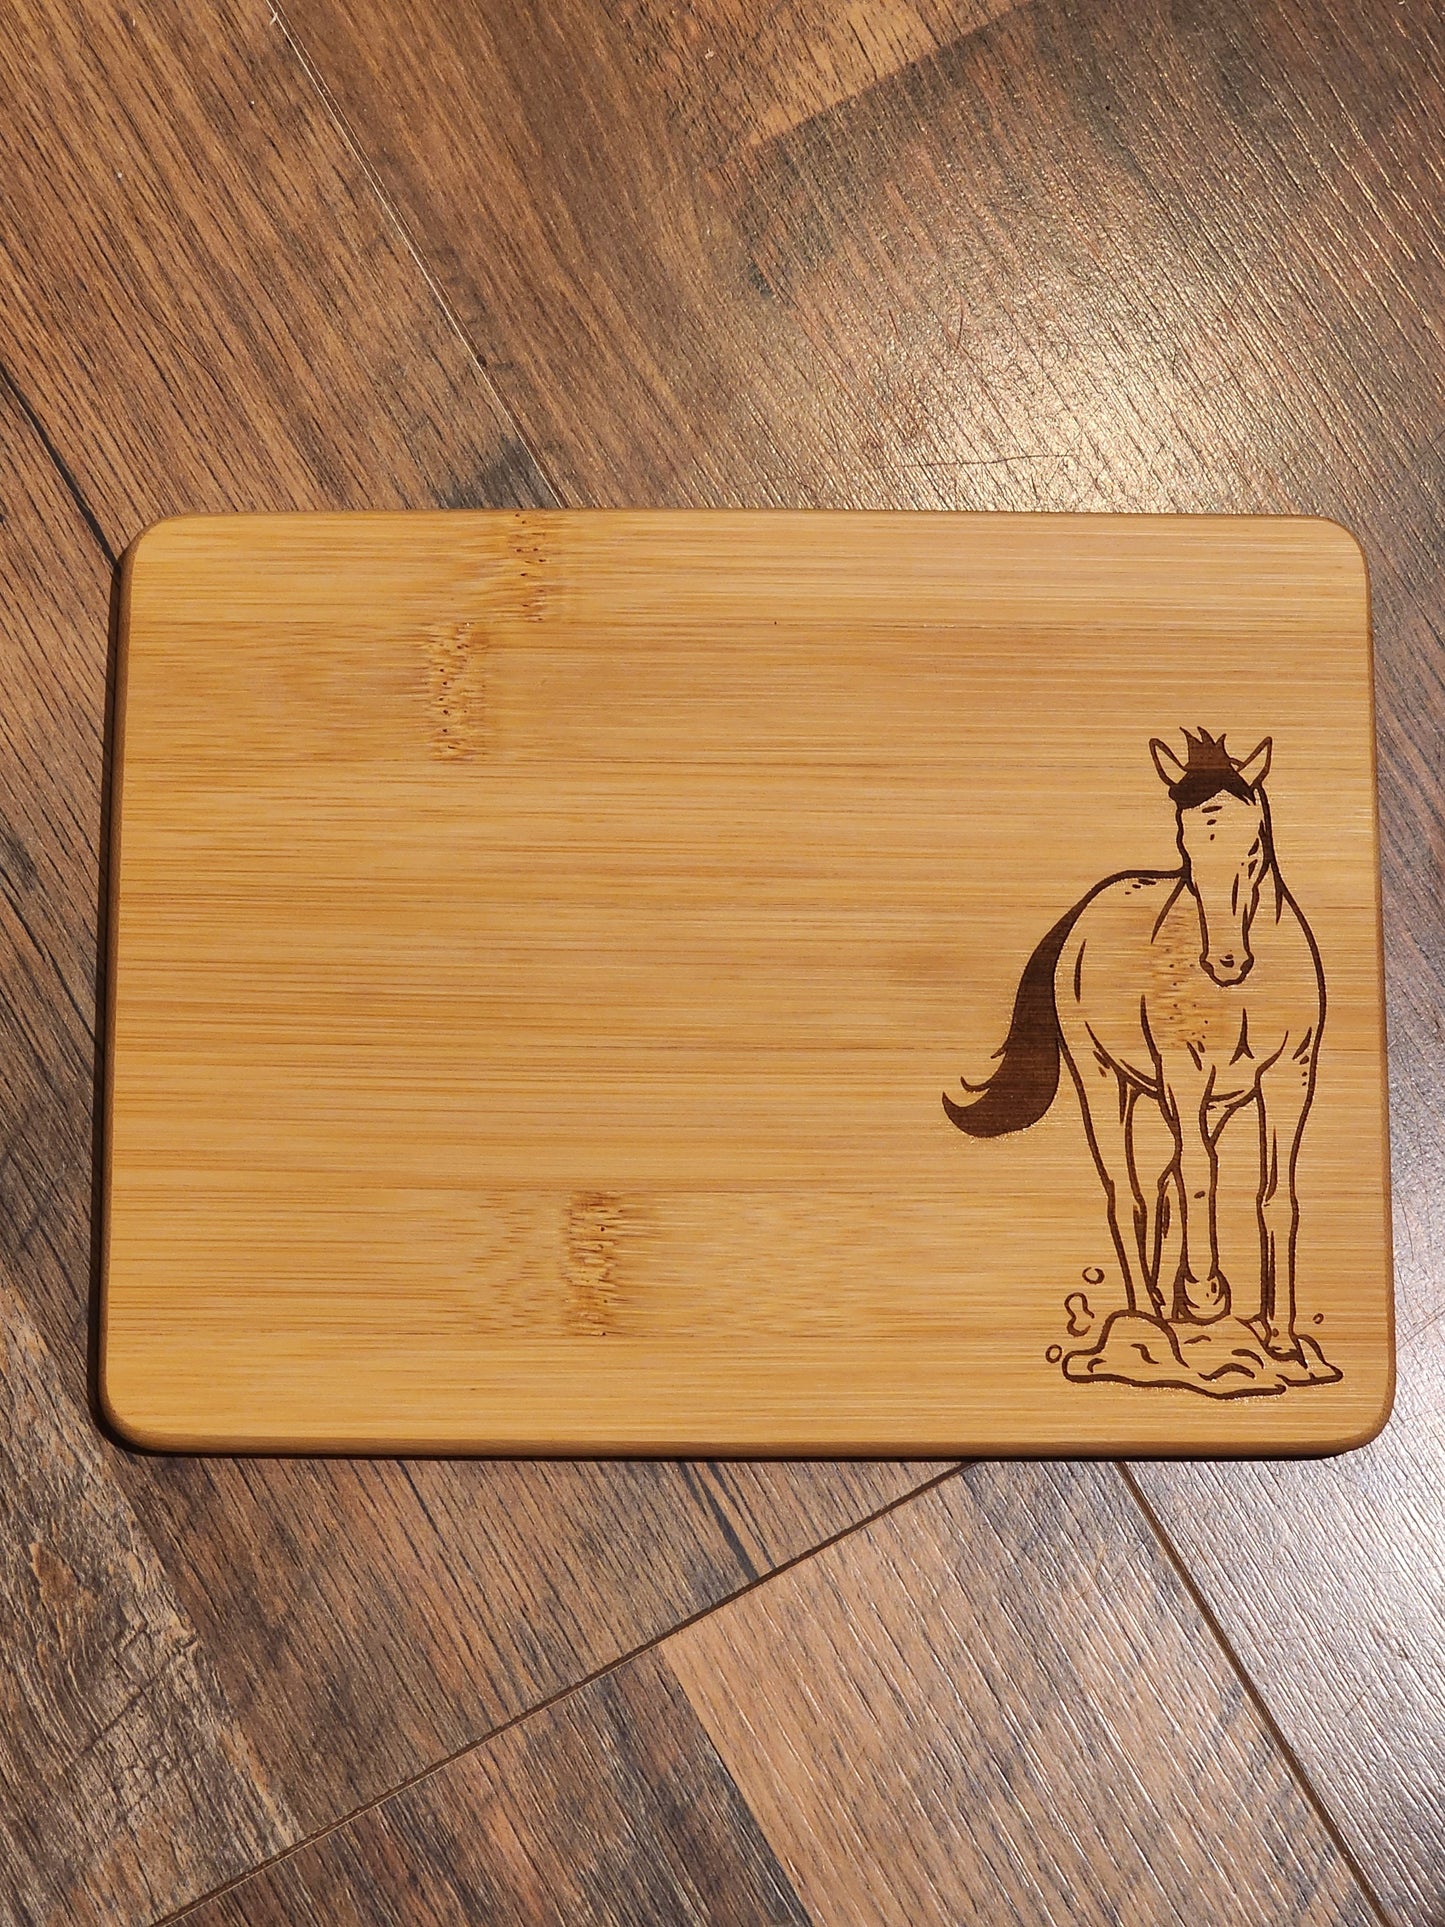 horse, western, country etched Bamboo Wood Cutting Board  - 8.75 x 6.875 inches